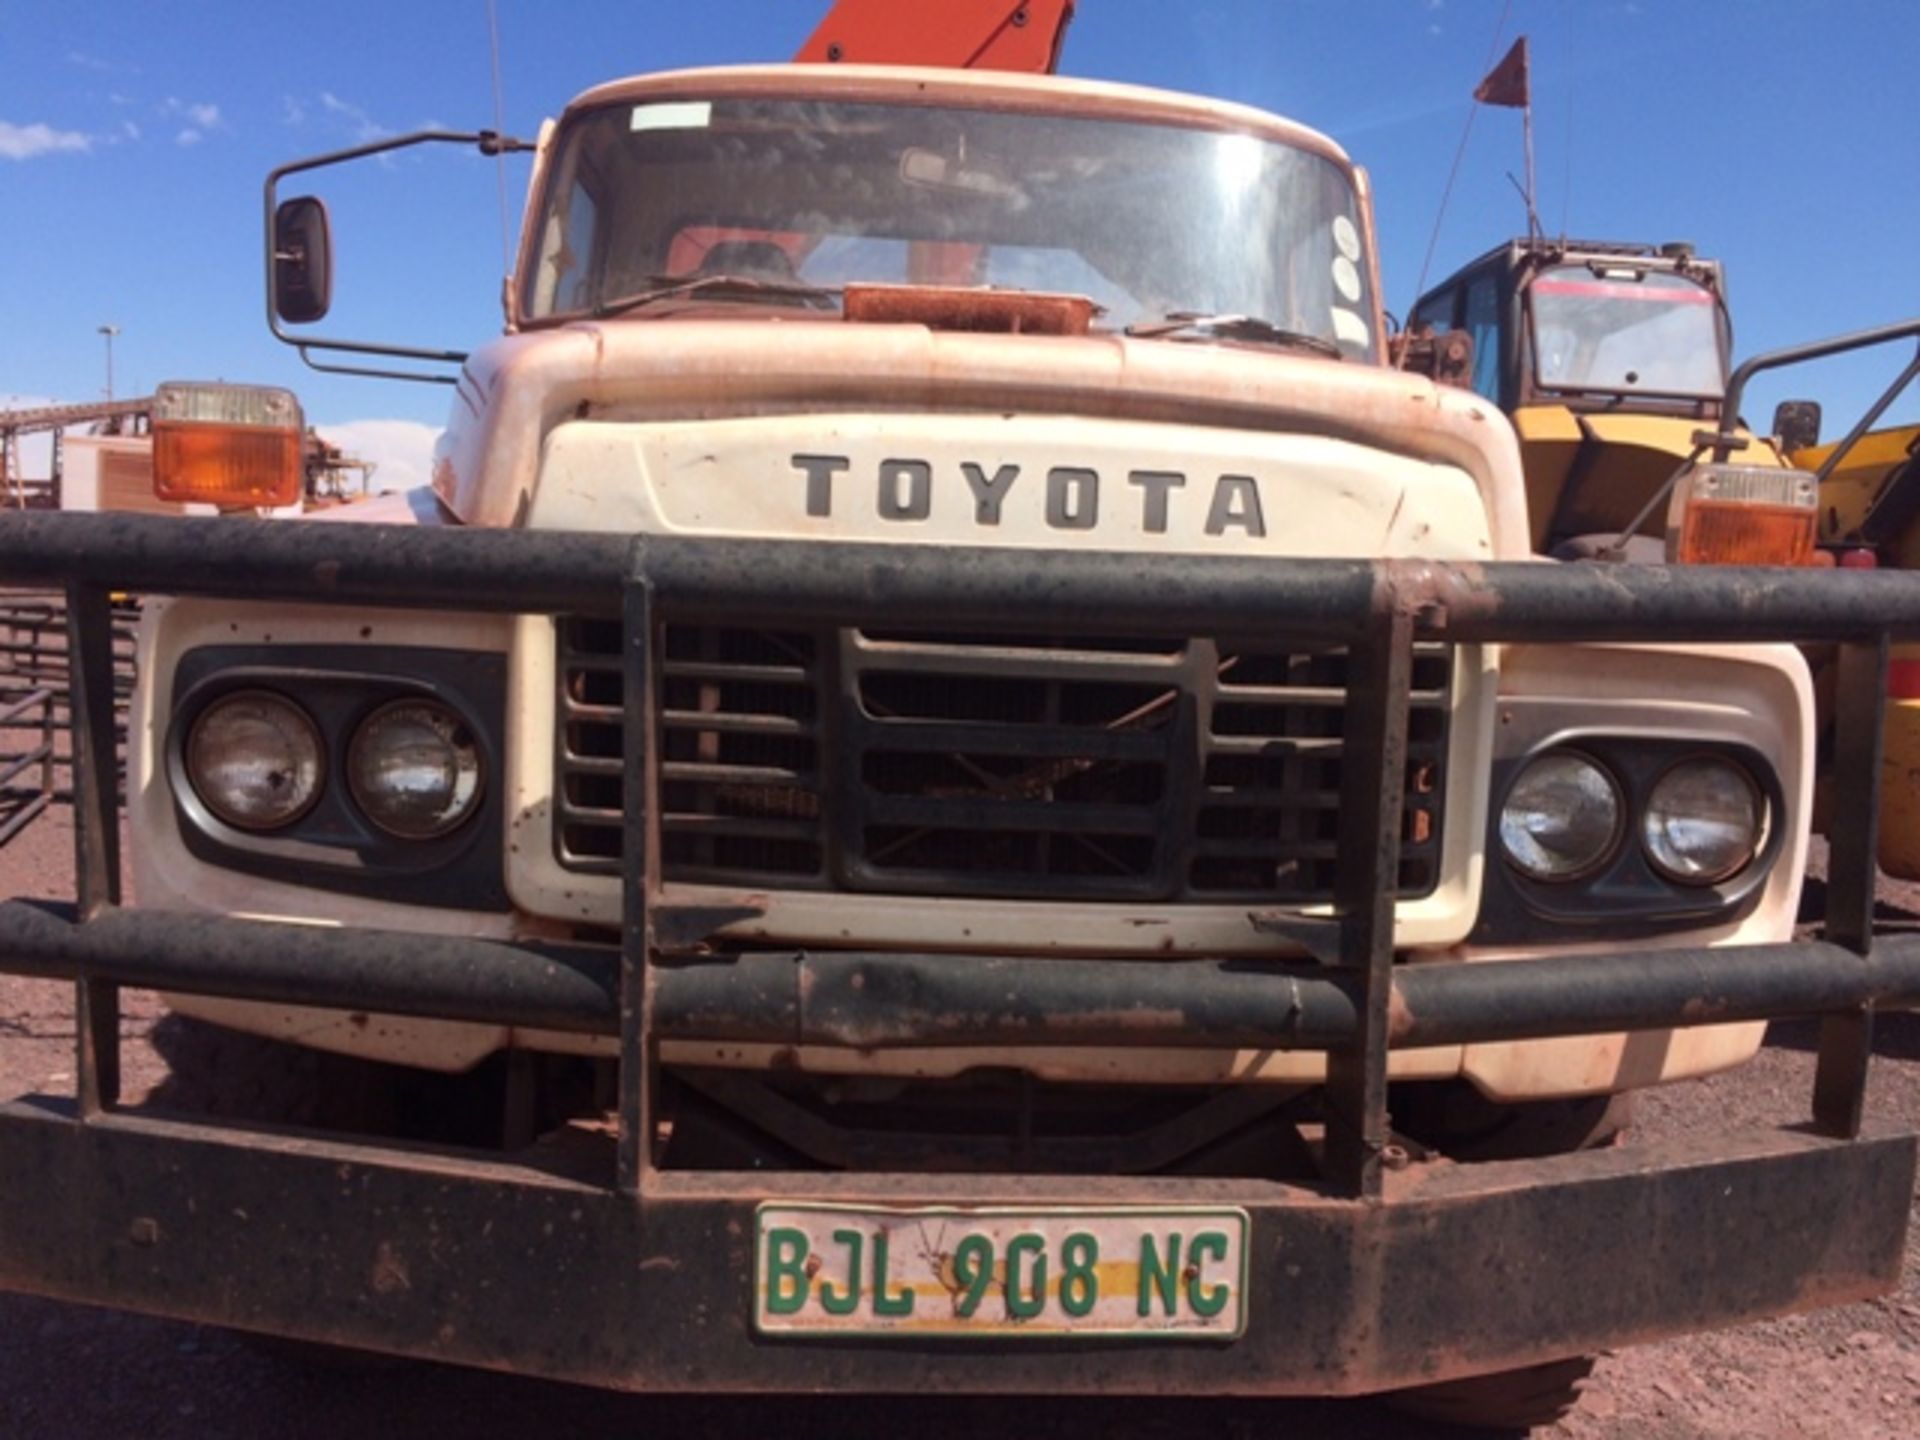 1997TOYOTA S/AXLE DROPSIDES TRUCK WITH 750CRANE 5440KM(DEREG.NO DOC FEE) 21 DAY PAPER DELAY)BEESHOEK - Image 2 of 10